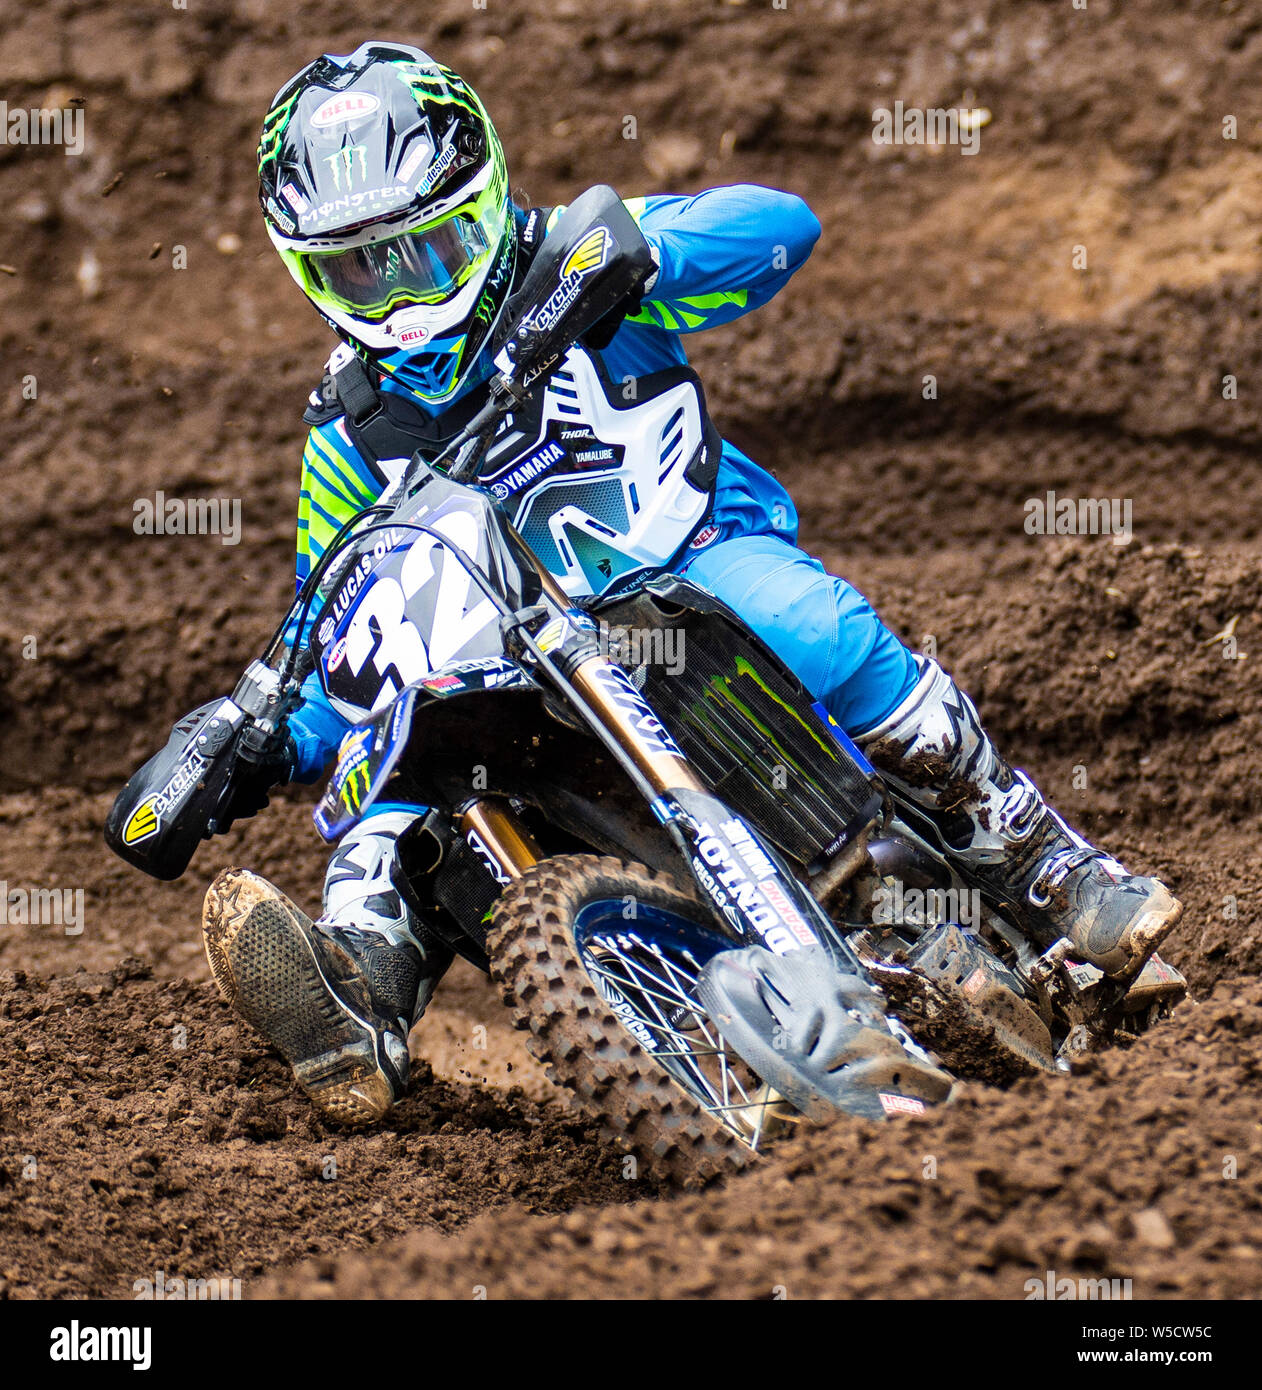 Washougal, USA. 27th July, 2019. # 32 Justin Cooper coming out of turn12 during the Lucas Oil Pro Motocross Washougal Championship 250 class moto # 1 at Washougal MX park Washougal, WA Thurman James/CSM/Alamy Live News Stock Photo